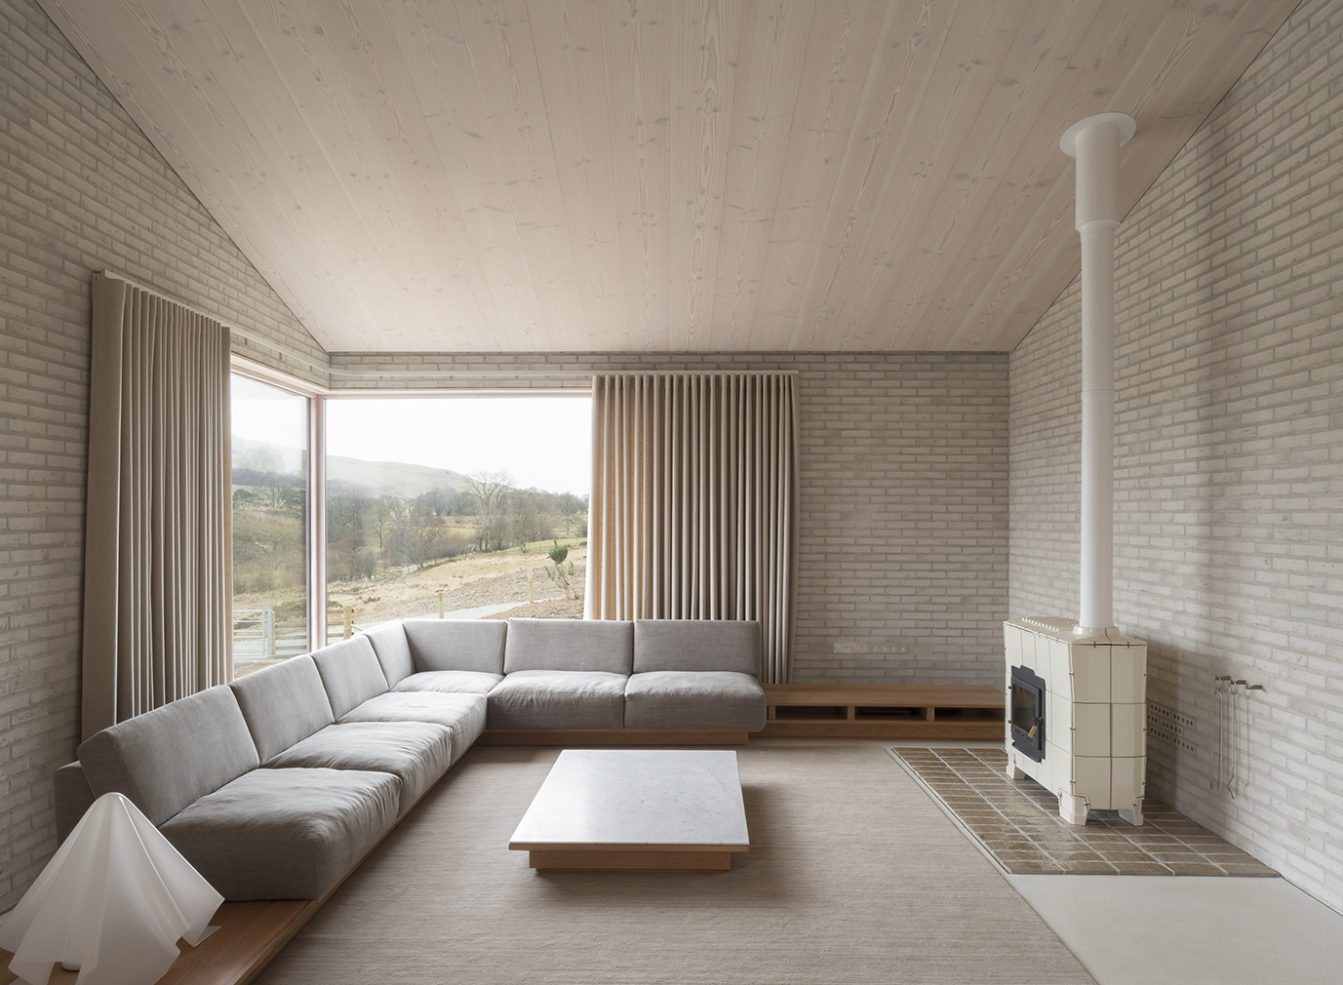 Tŷ Bywyd in Wales by John Pawson. Photography: Gilbert McCarragher / Living Architecture